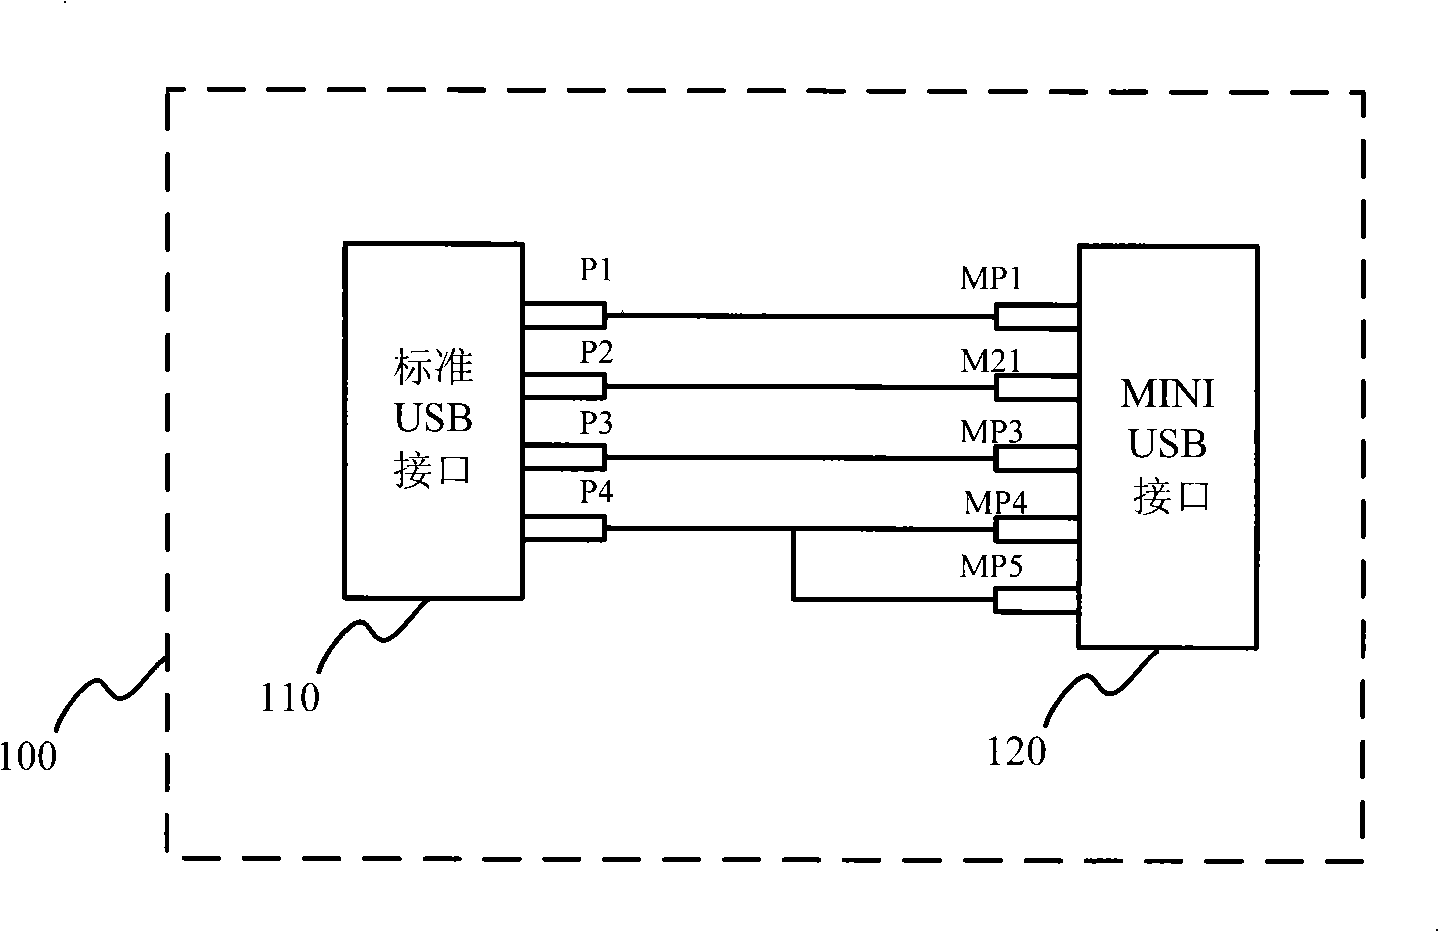 USB interface switching device